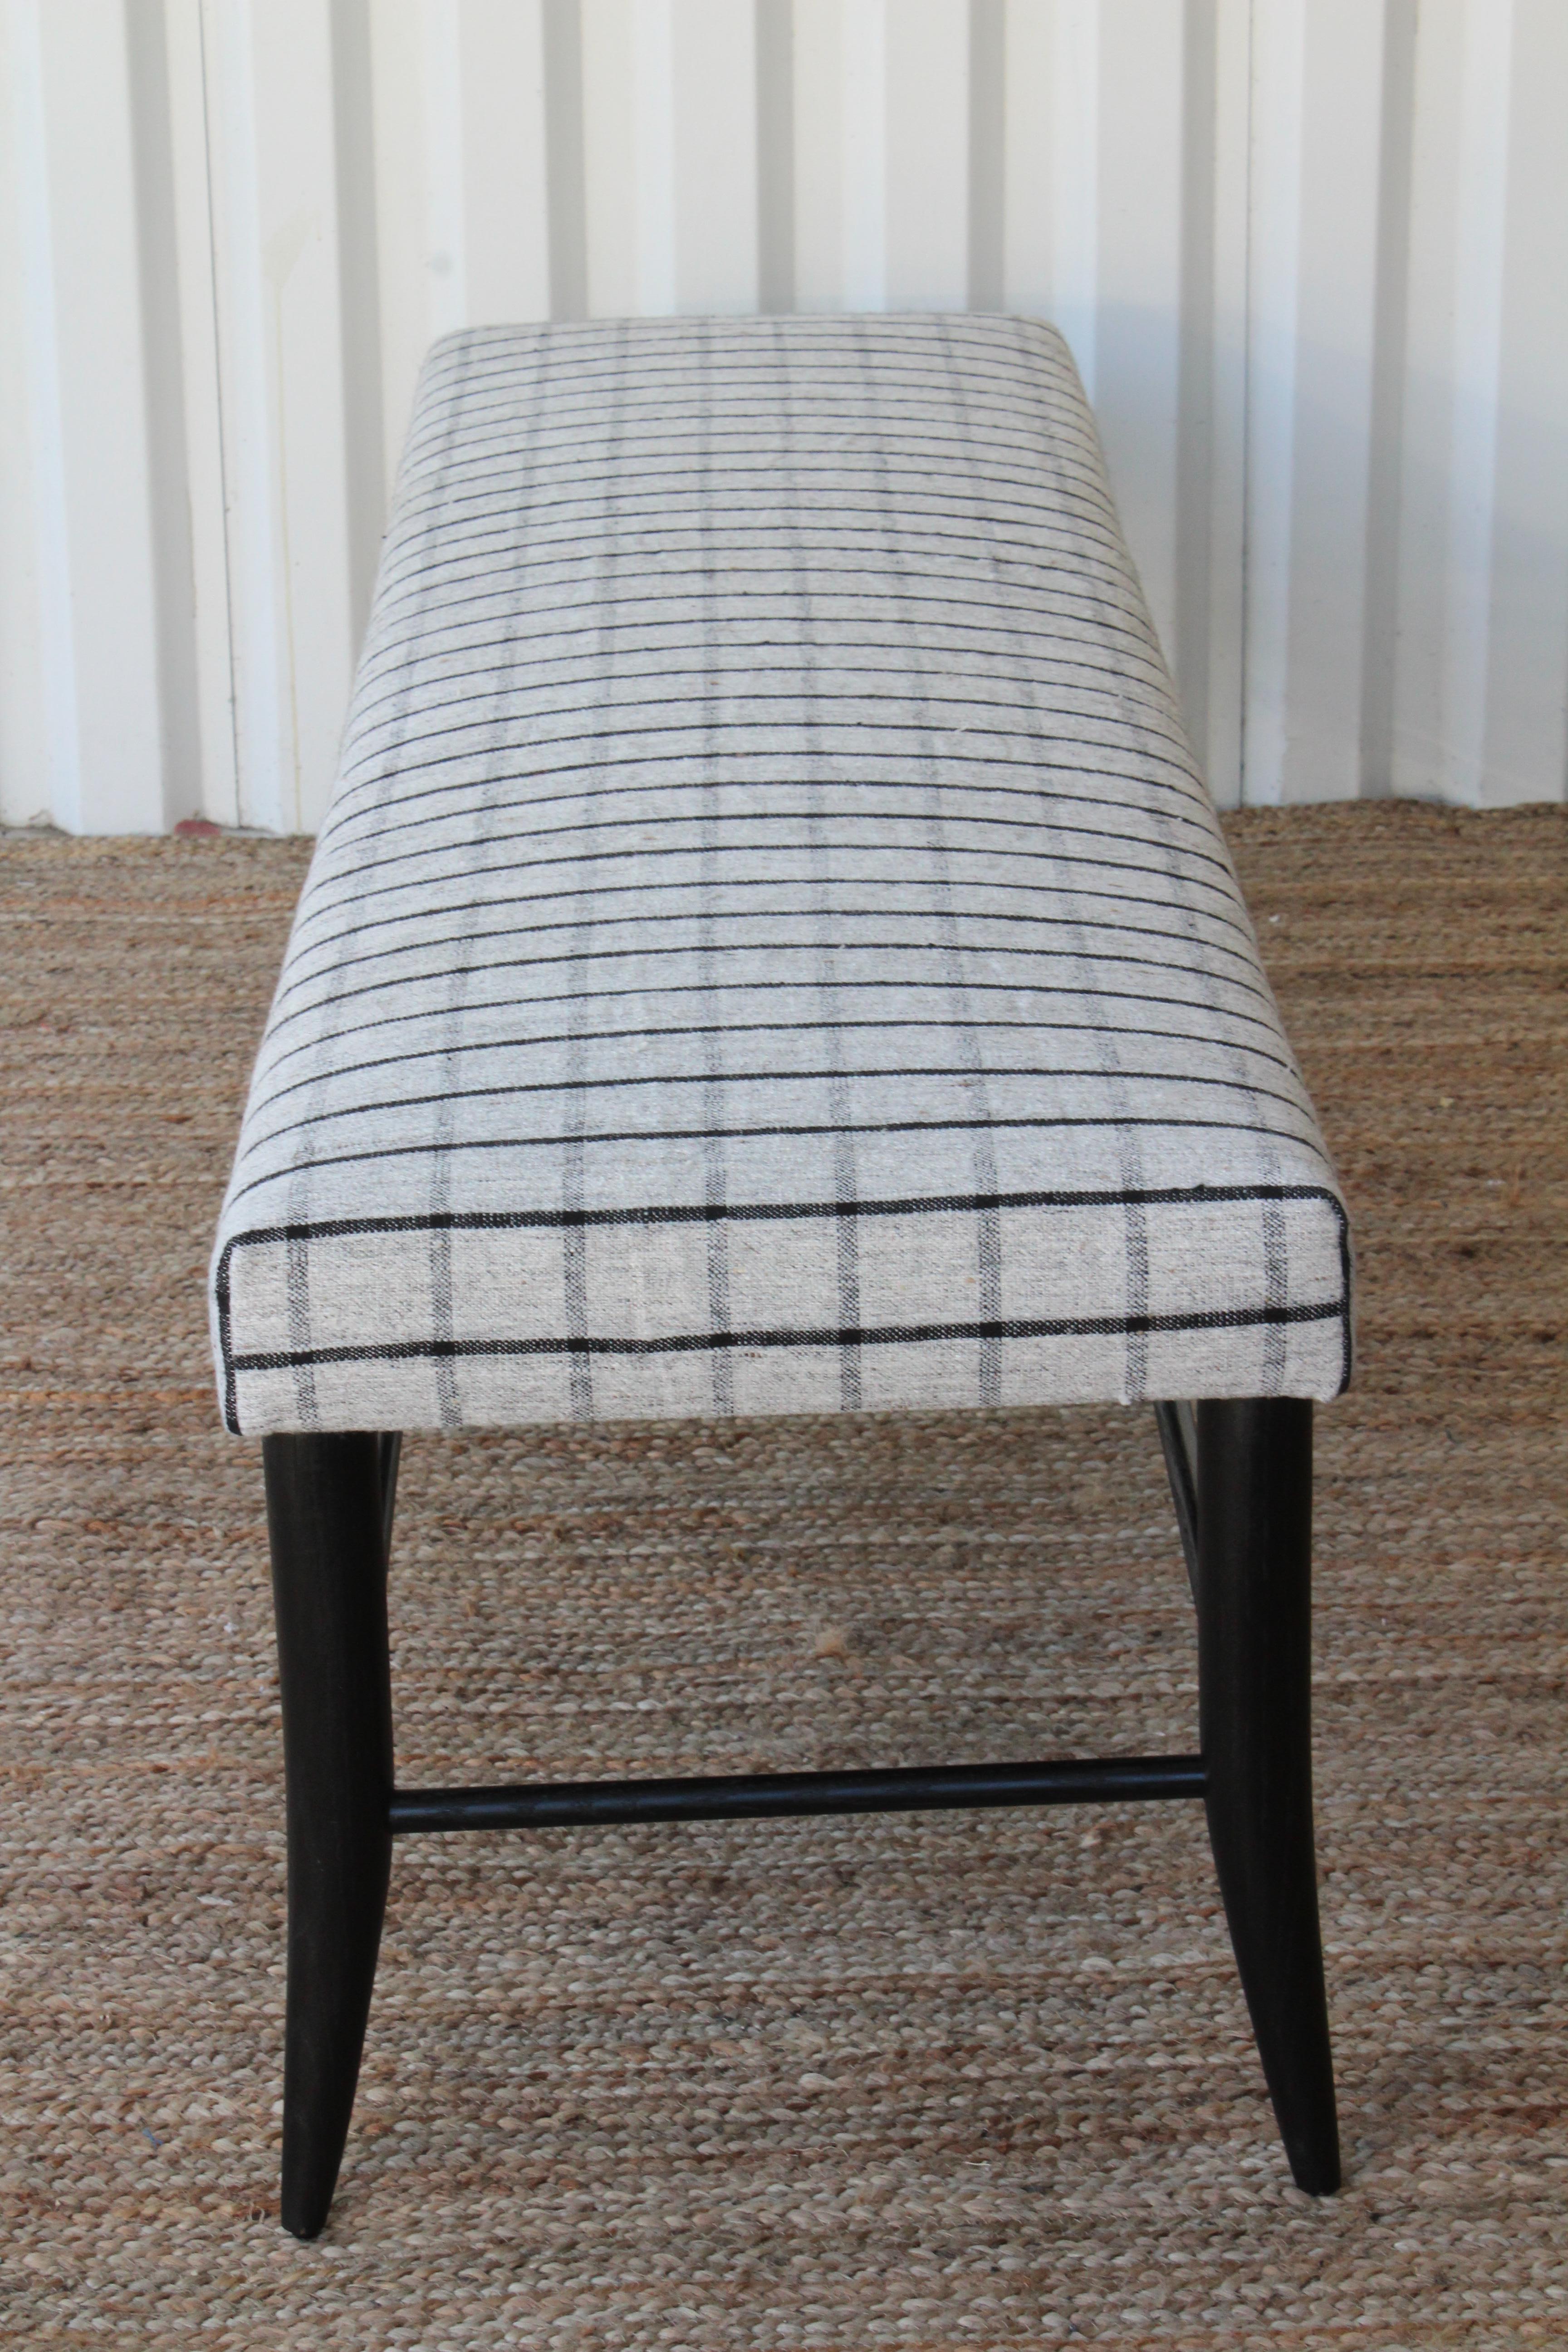 Custom Croft Bench Upholstered in a Vintage Wool Textile 5